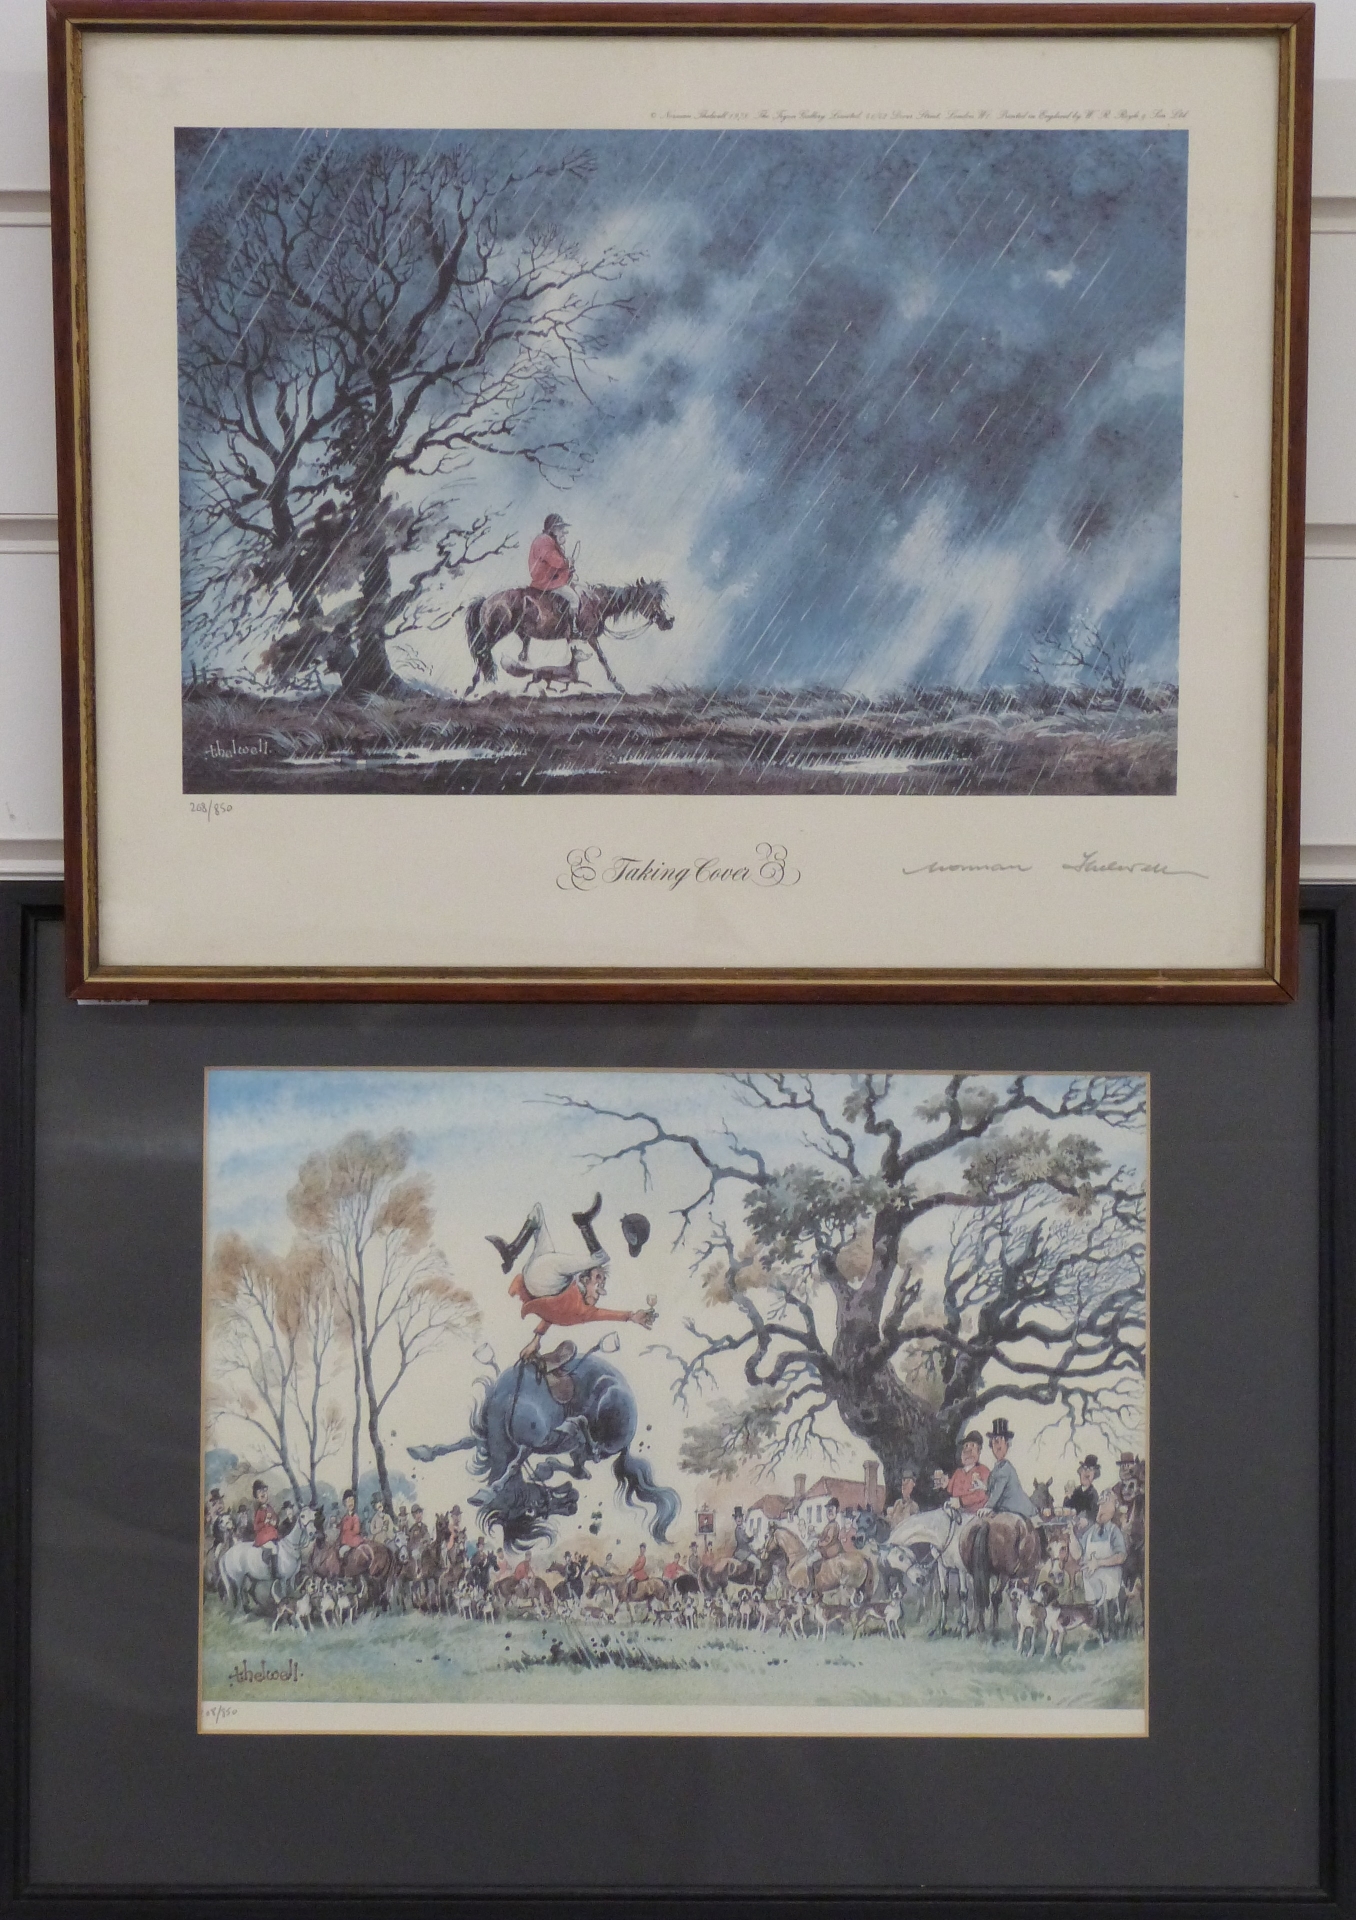 Two Norman Thelwell limited edition prints, one signed 'Taking Cover' and one depicting a meet,